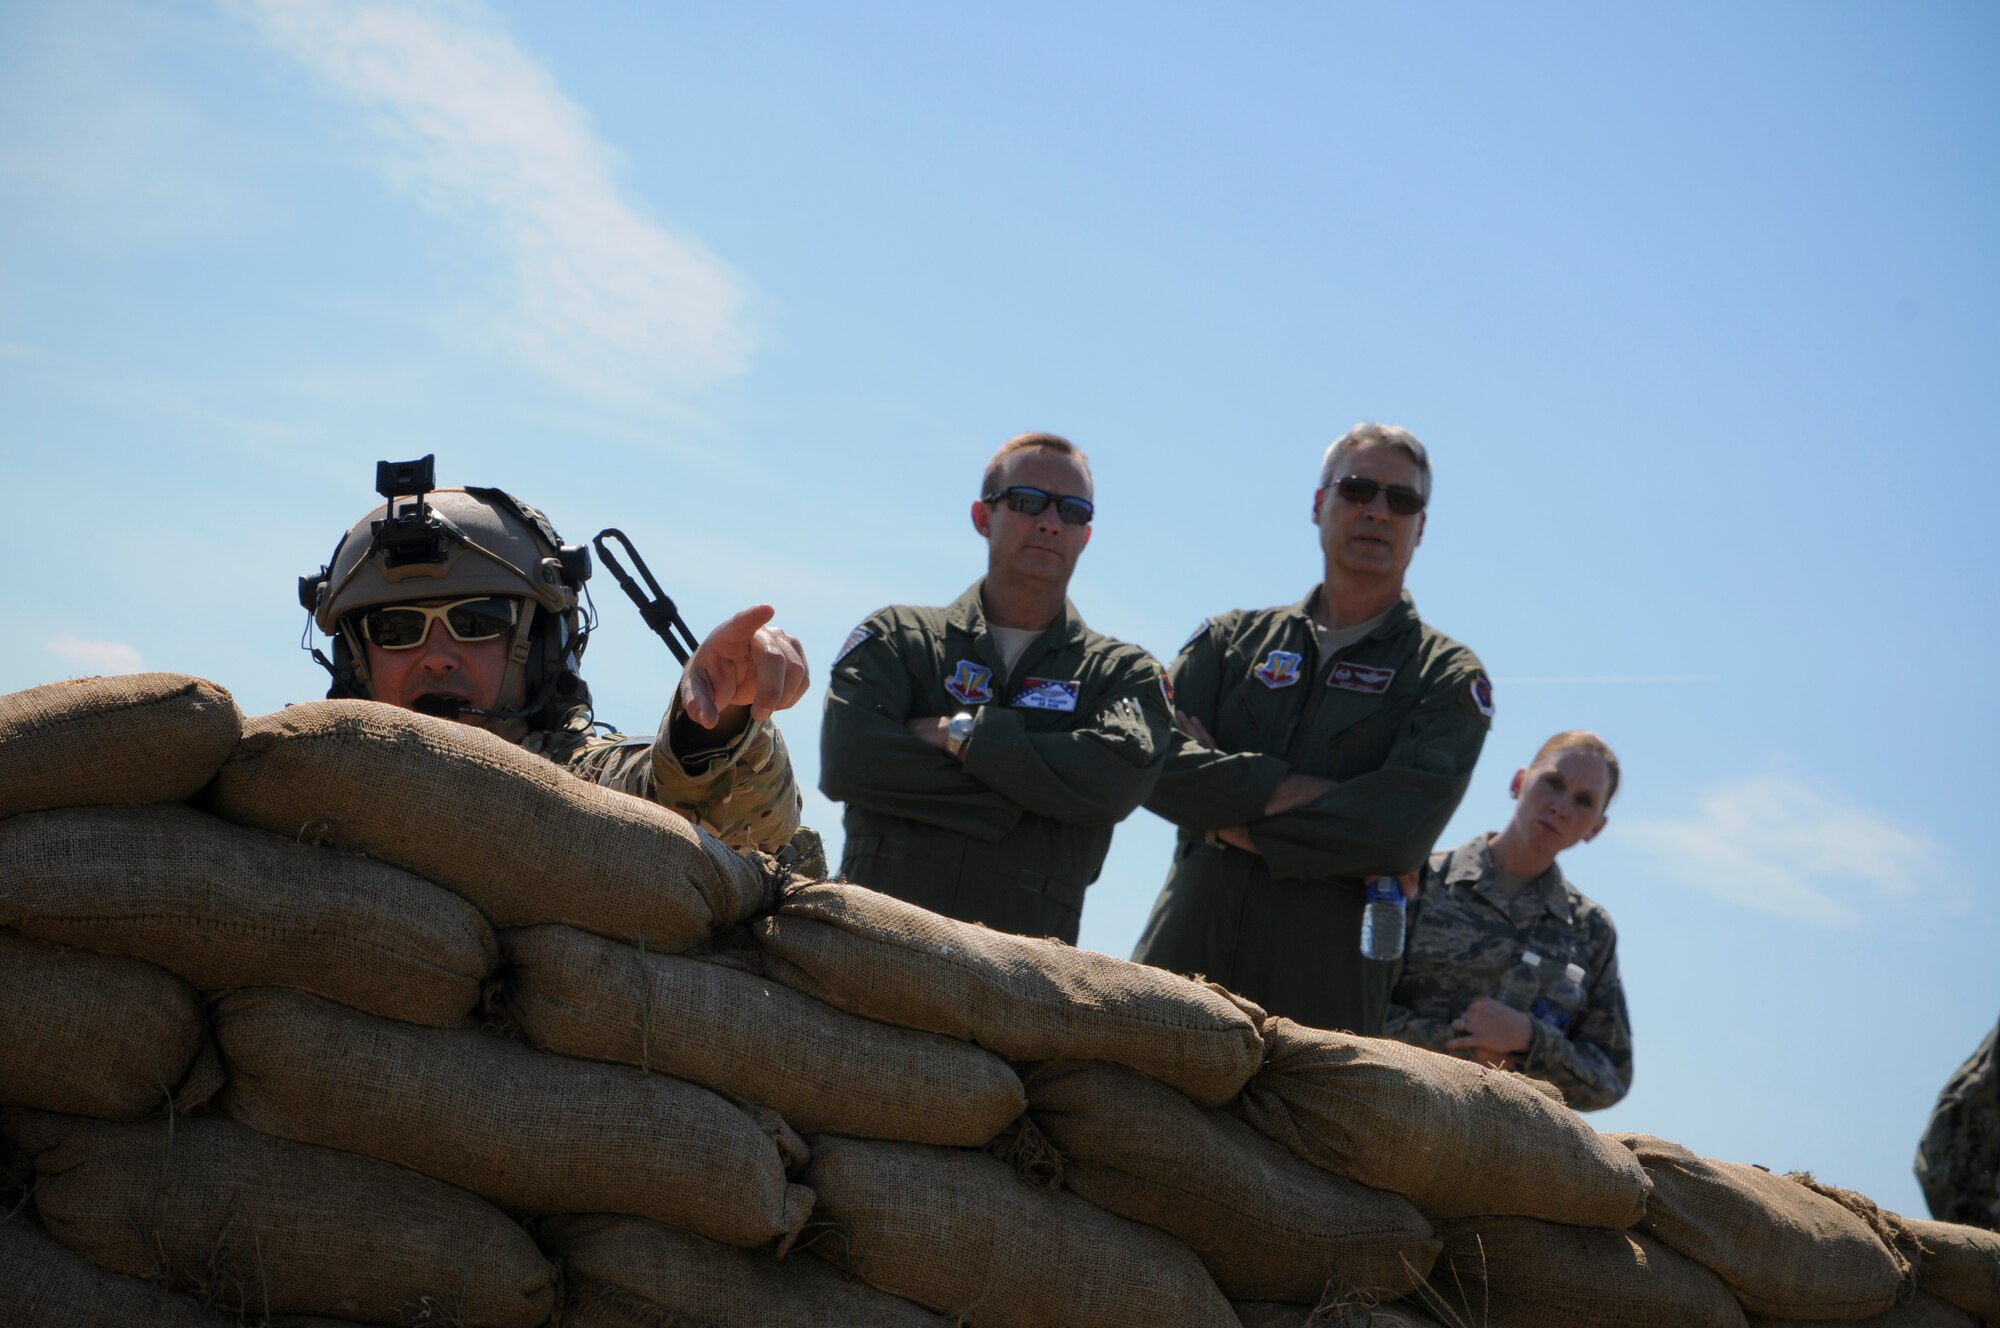 Tech. Sgt. Robert Ellis, Detachment 1 Joint Terminal Attack Controller liaison and evaluator, points to a simulated target as Brig. Gen. Kurt Vogel, commander of the Arkansas Air National Guard, and Col. Marc Sicard, director of staff for the Arkansas Air National Guard, watch in the distance Aug. 1, 2015. Ellis, along with his joint training partners in the Army and Navy, participated in a simulated training event demonstrating the unique capabilities of Razorback Range Det. 1 located at Fort Chaffee Maneuver Training Center, Ark.. (U.S. Air National Guard photo by Capt. Holli Nelson/Released)